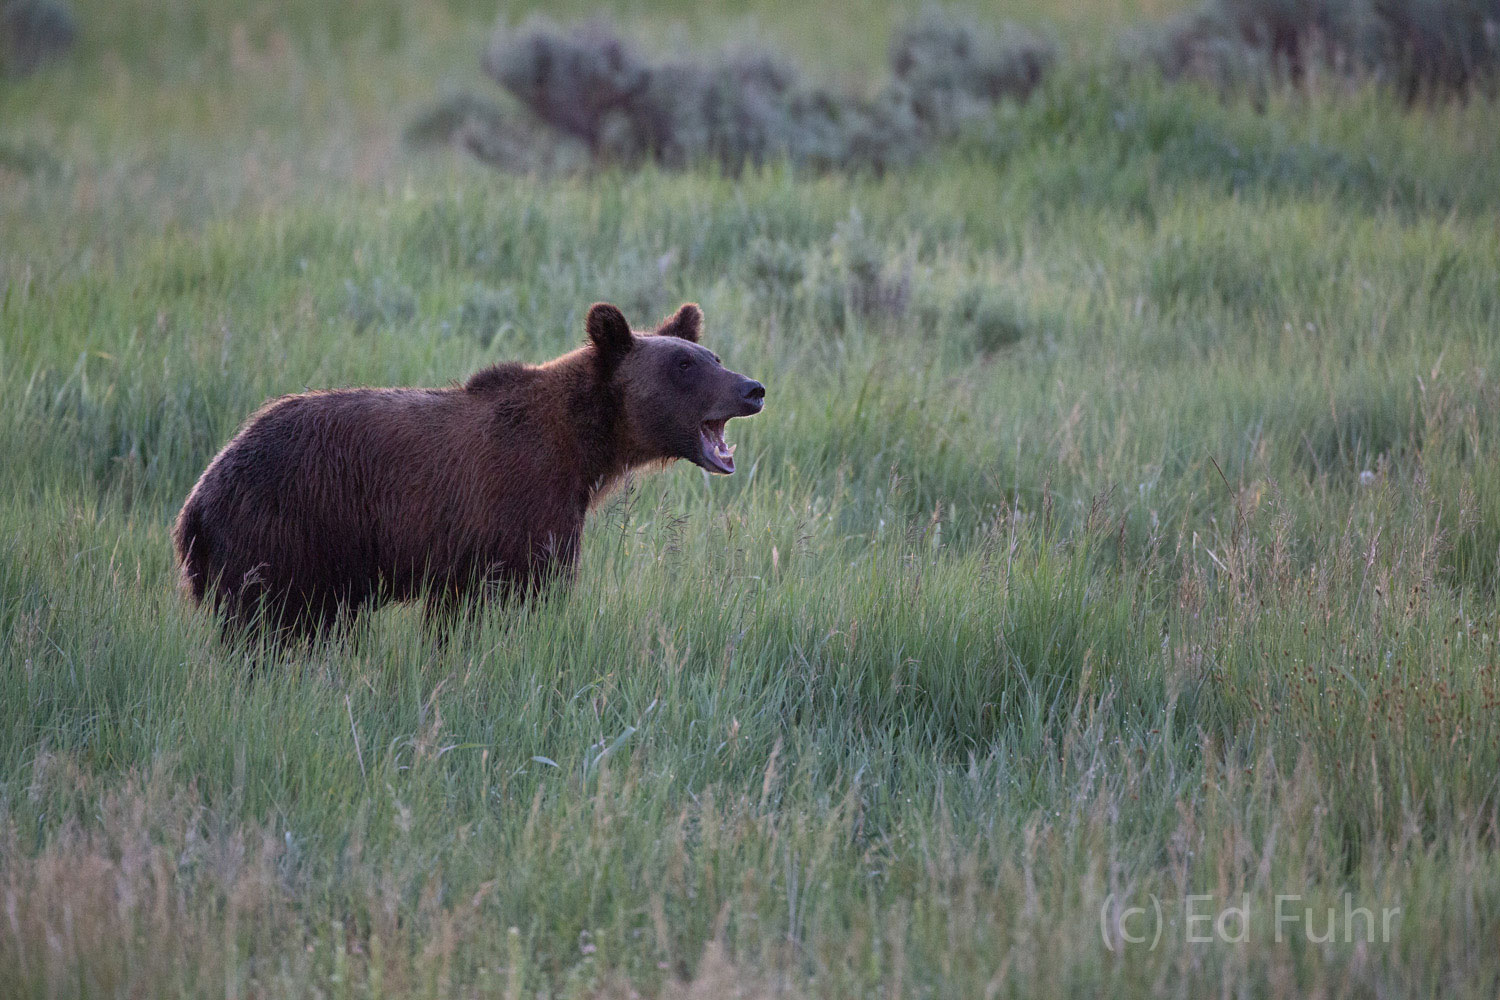 One of grizzly 610's cubs cries in distress after mom and her two sblings scatter after smelling an another approaching grizzly...